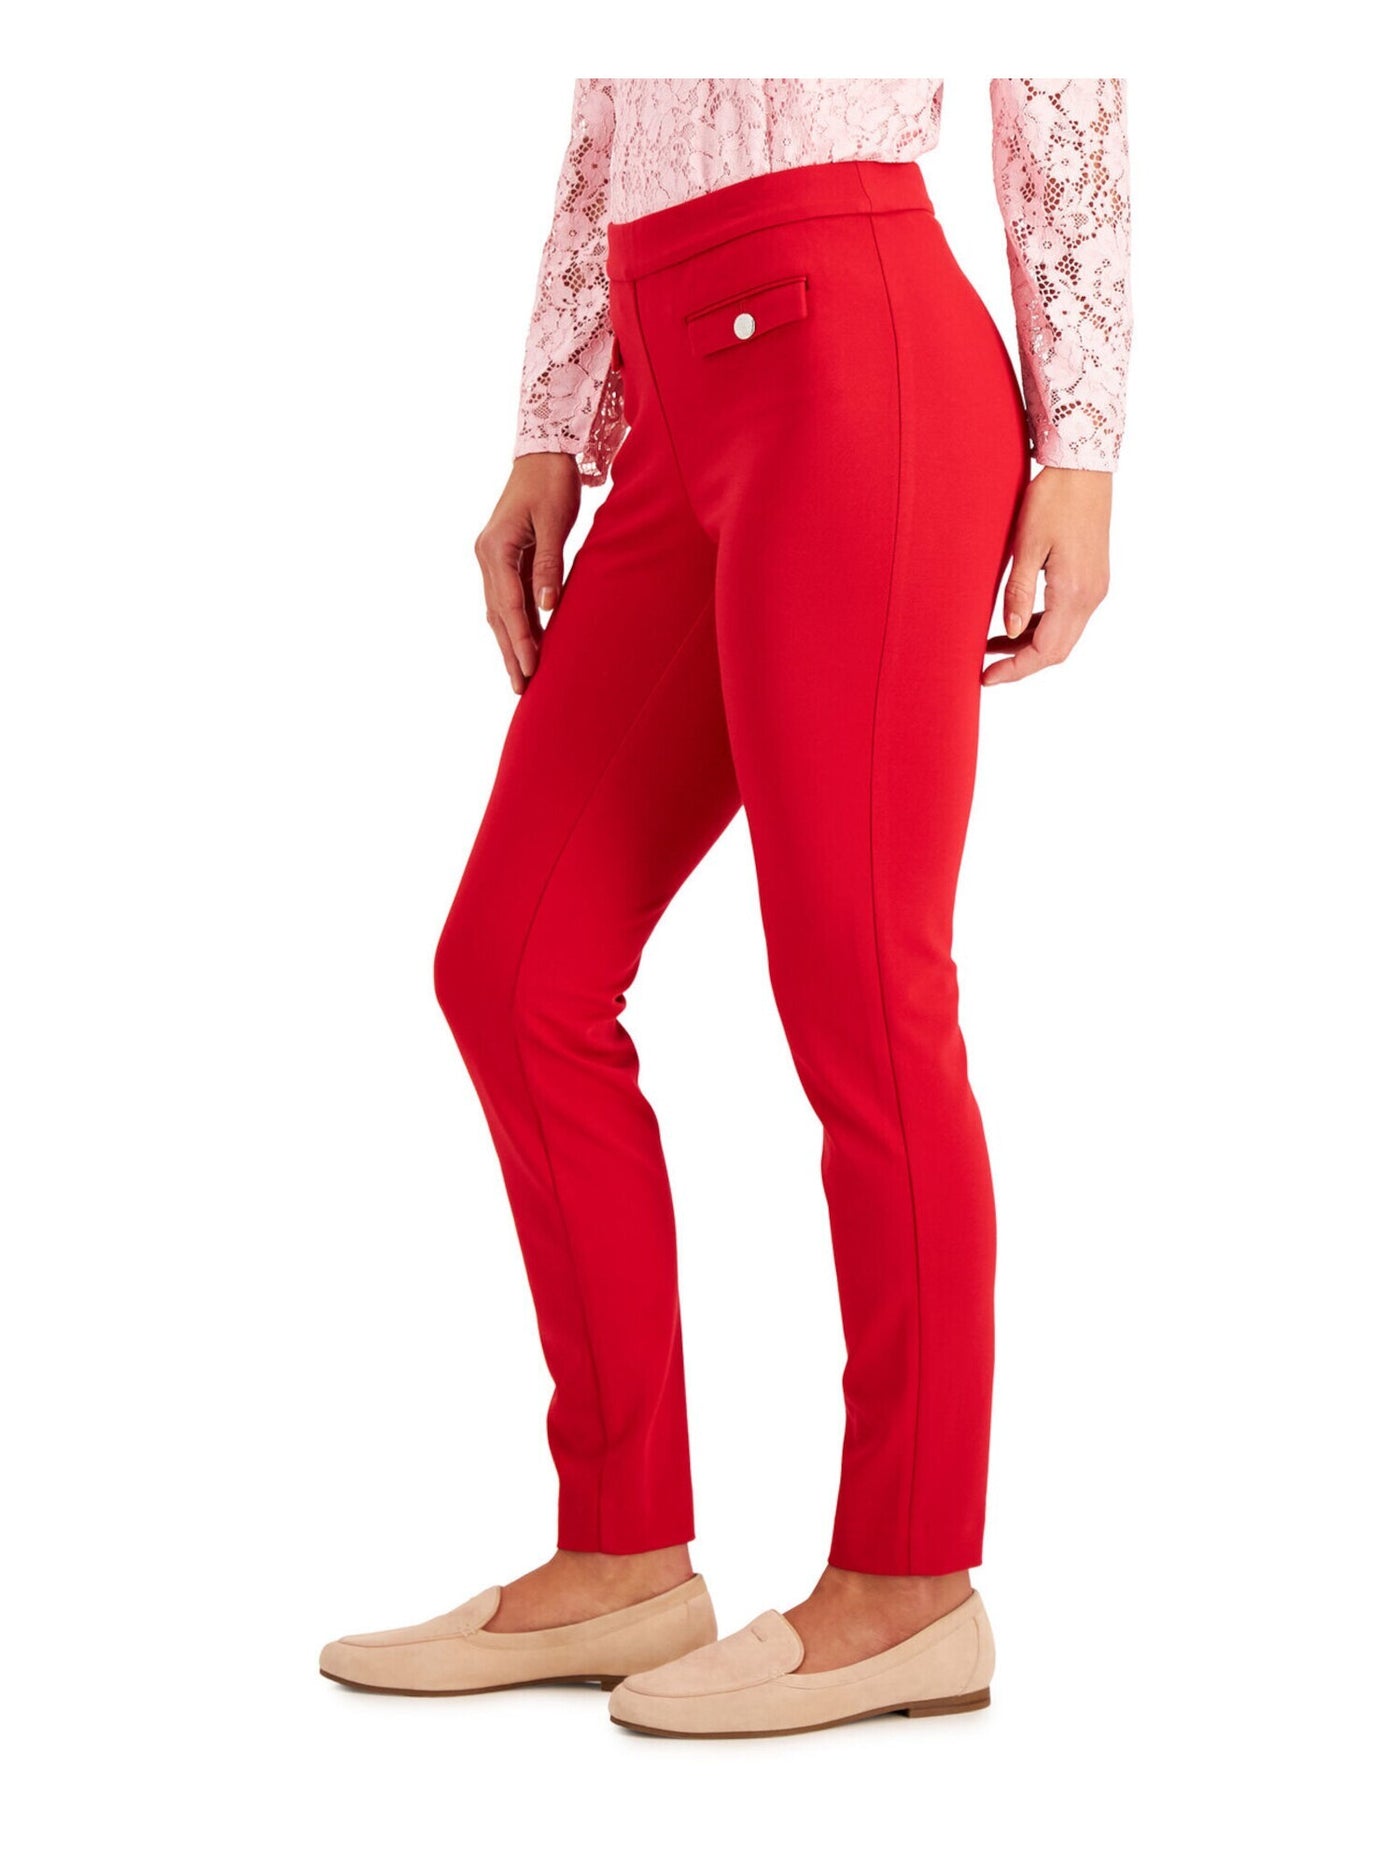 CHARTER CLUB Womens Red Stretch Pocketed Ponte-knit Pull-on Wear To Work Skinny Pants 18